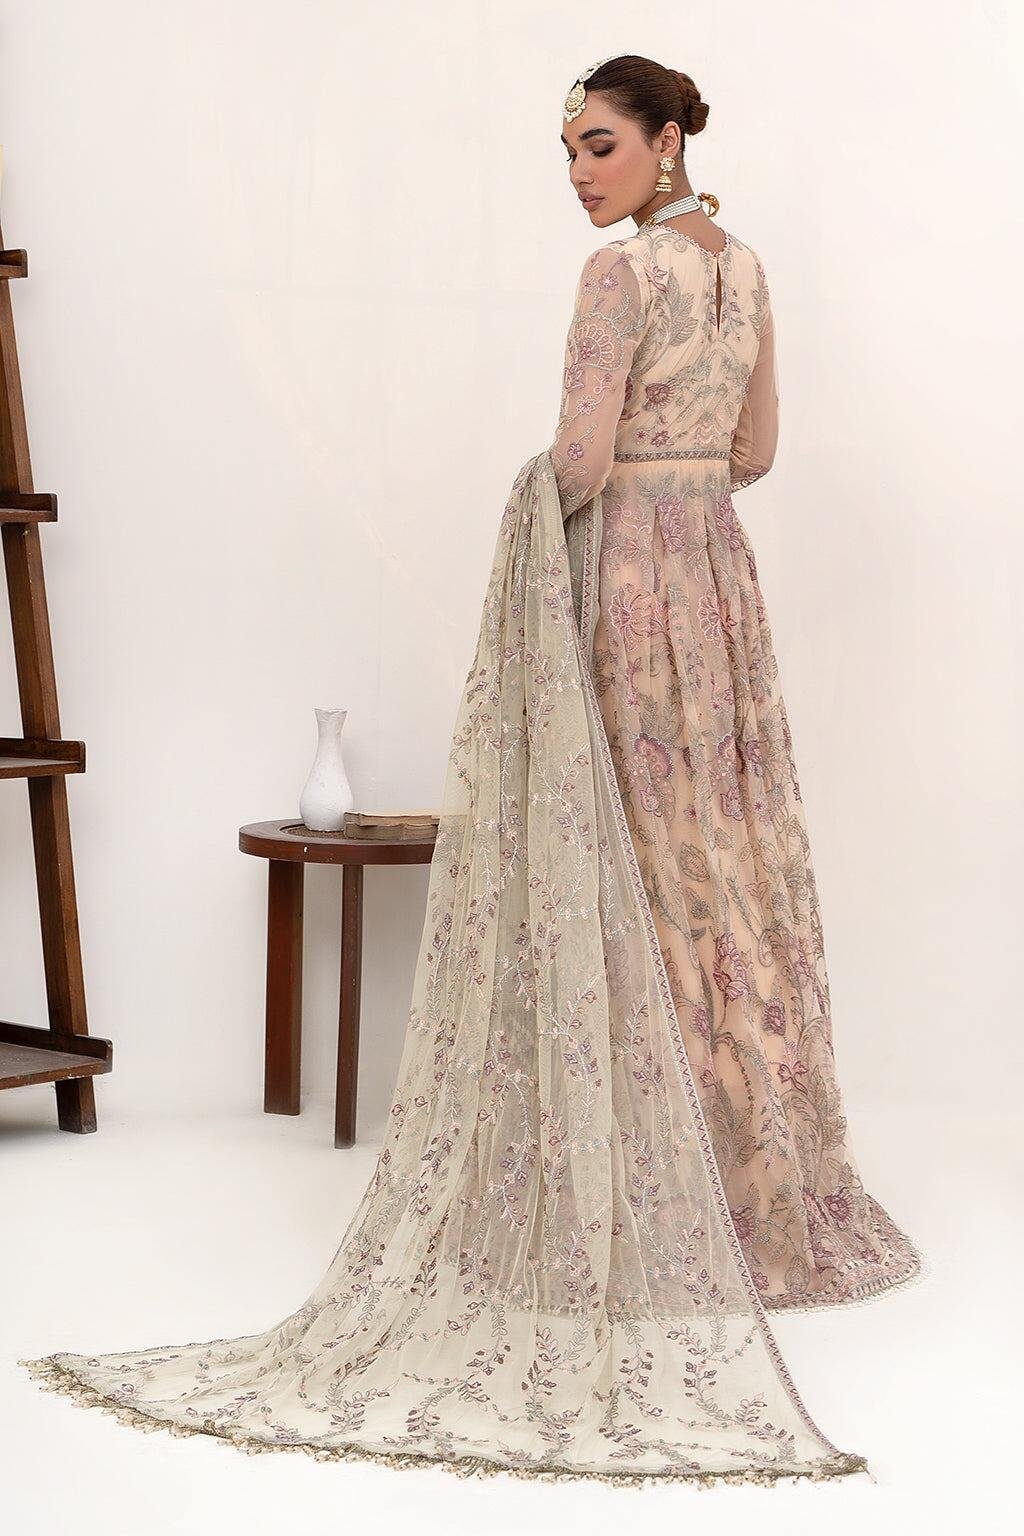 Zn 08 Roserie Nazneen Zarif Embroidered Formel Collection SHAHZADI LAWN